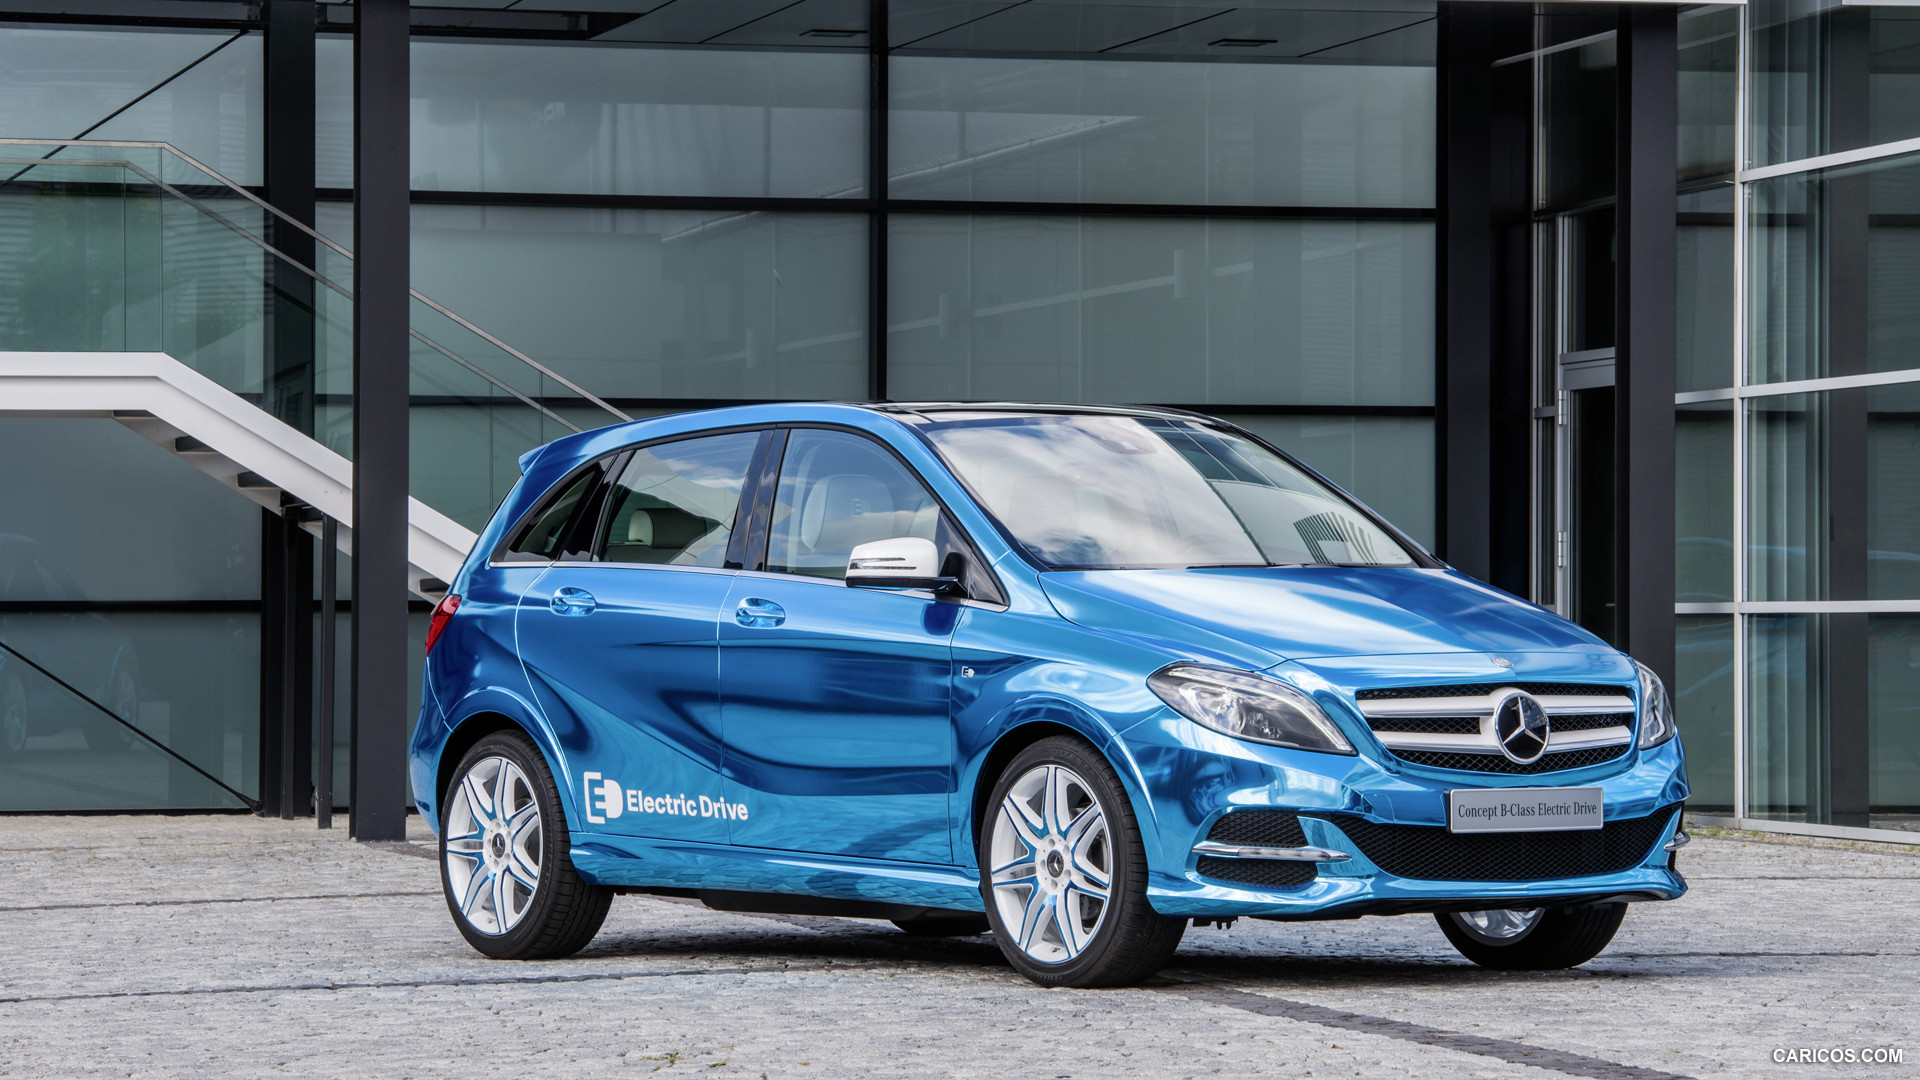 2012 Mercedes-Benz B-Class Electric Drive Concept  - Front, #1 of 18